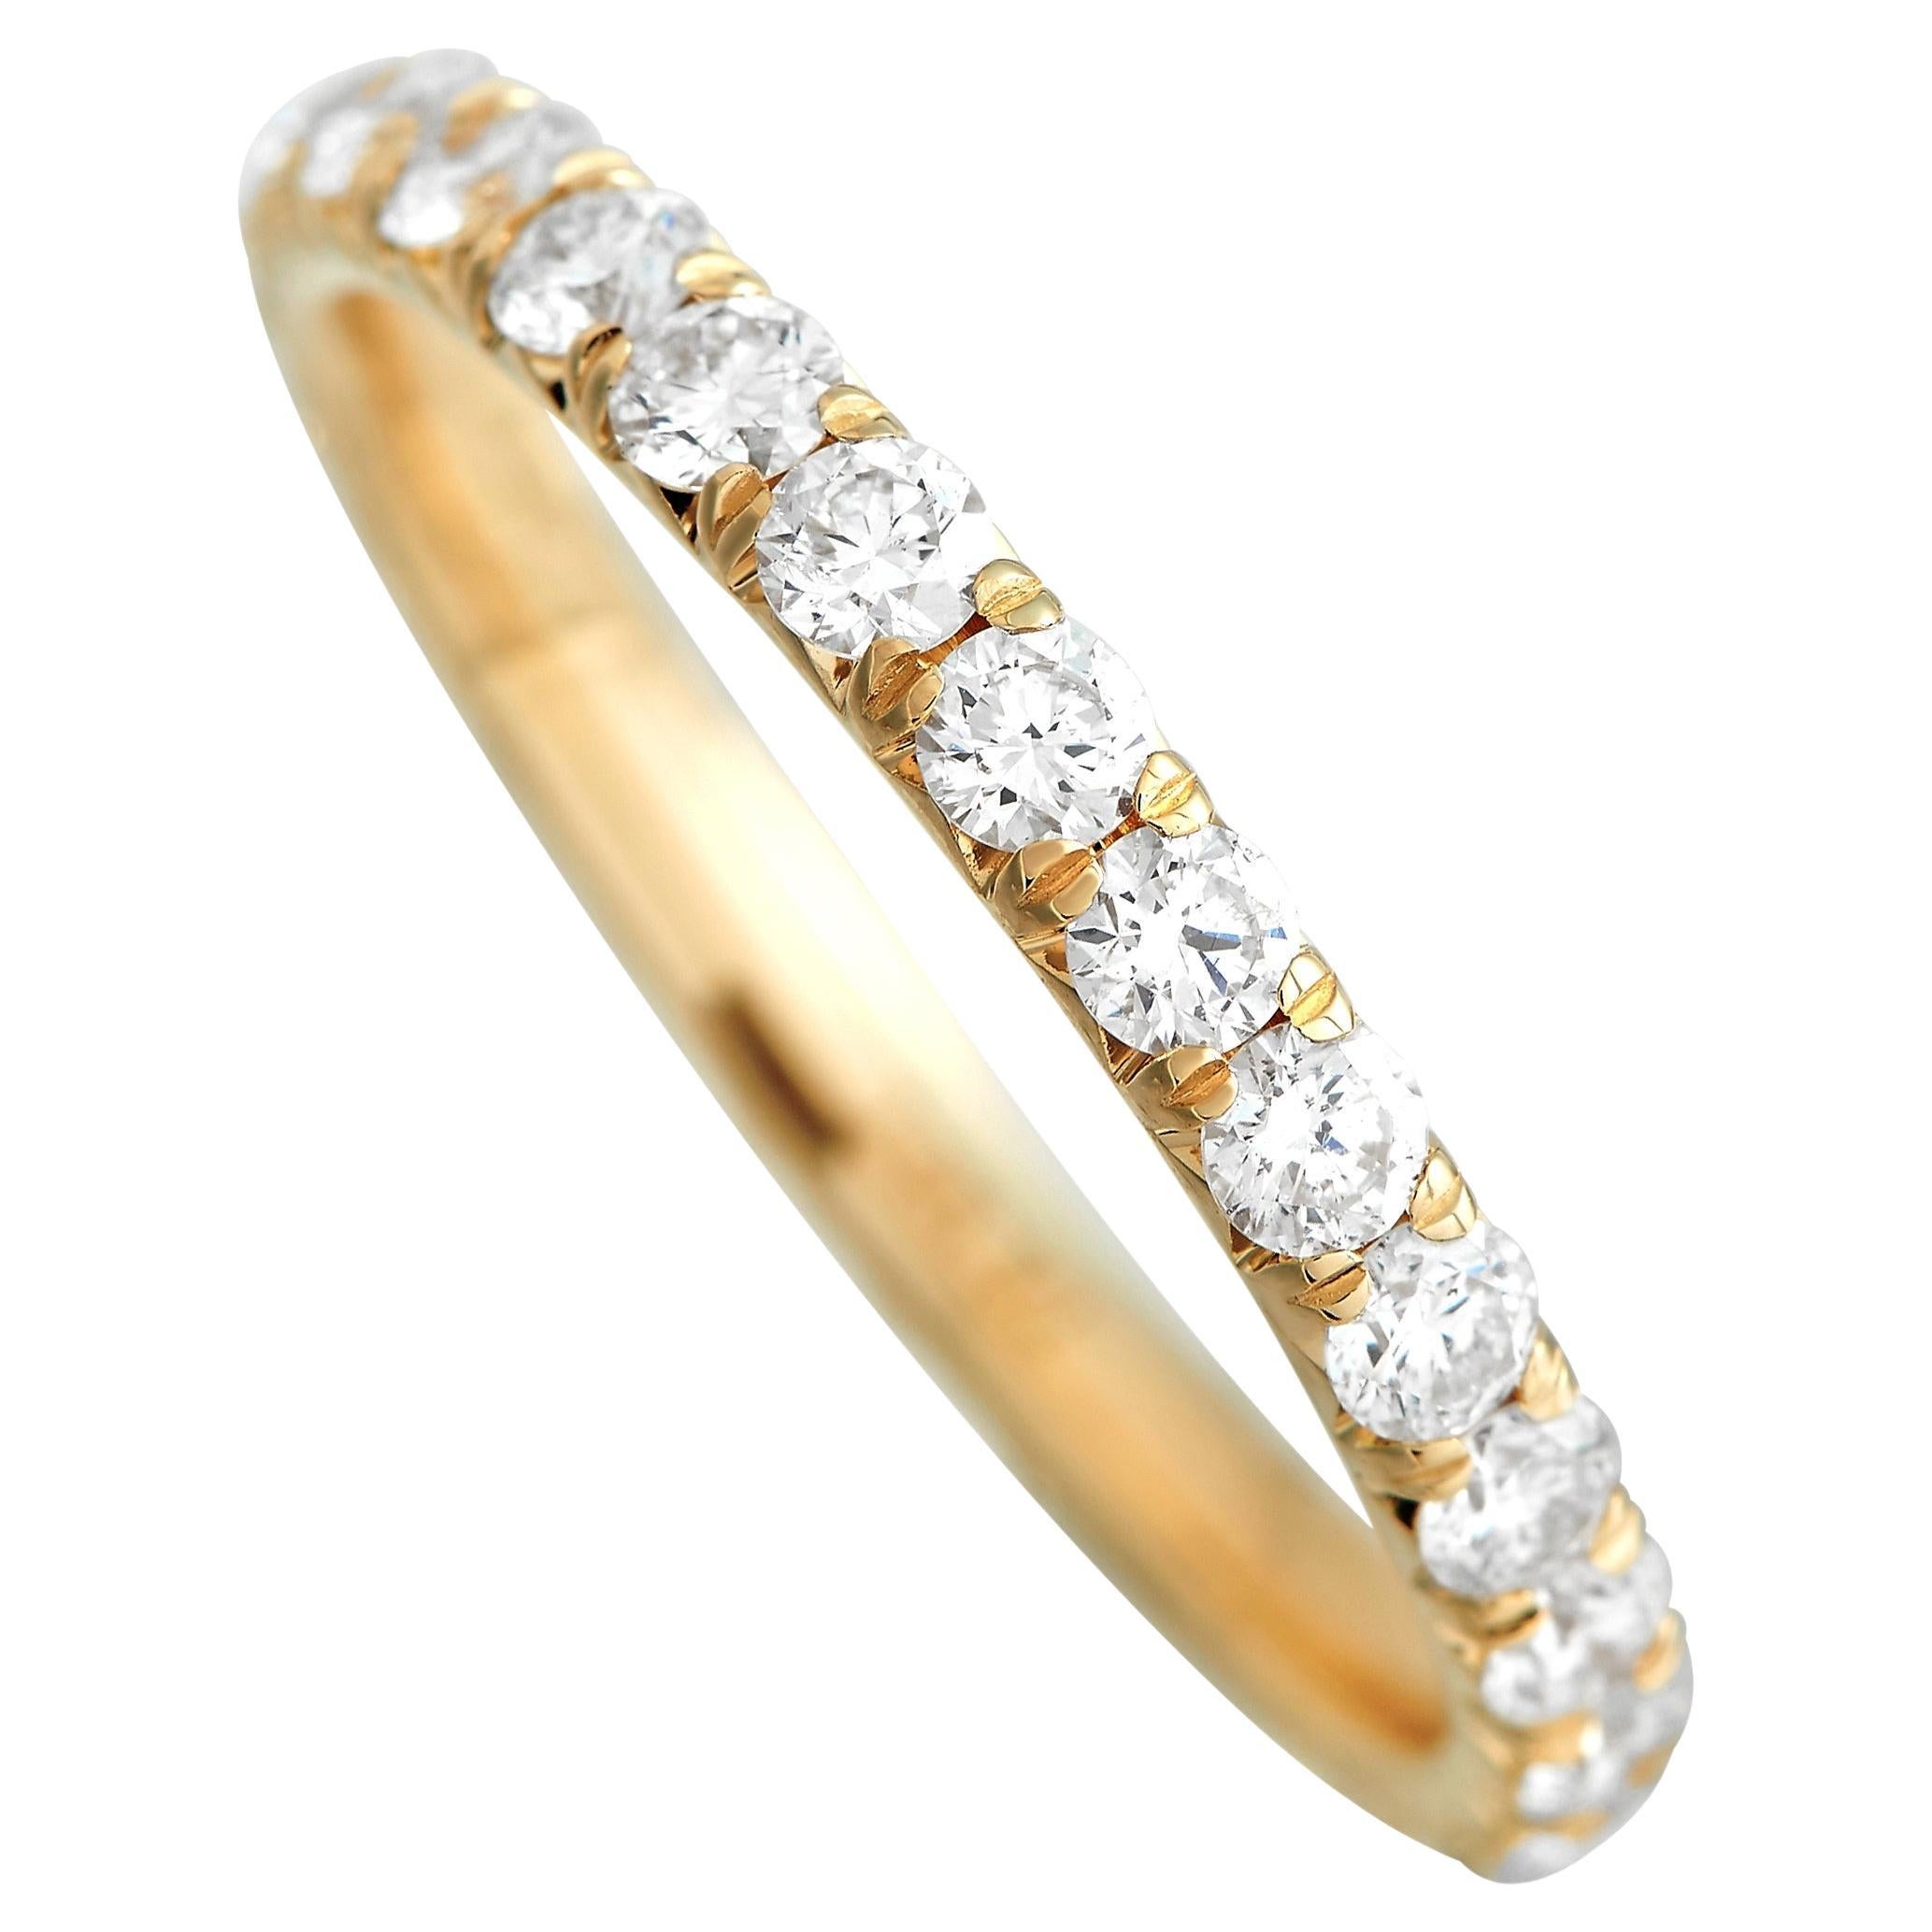 LB Exclusive 18K Yellow Gold 1.05 Ct Diamond Eternity Band Ring